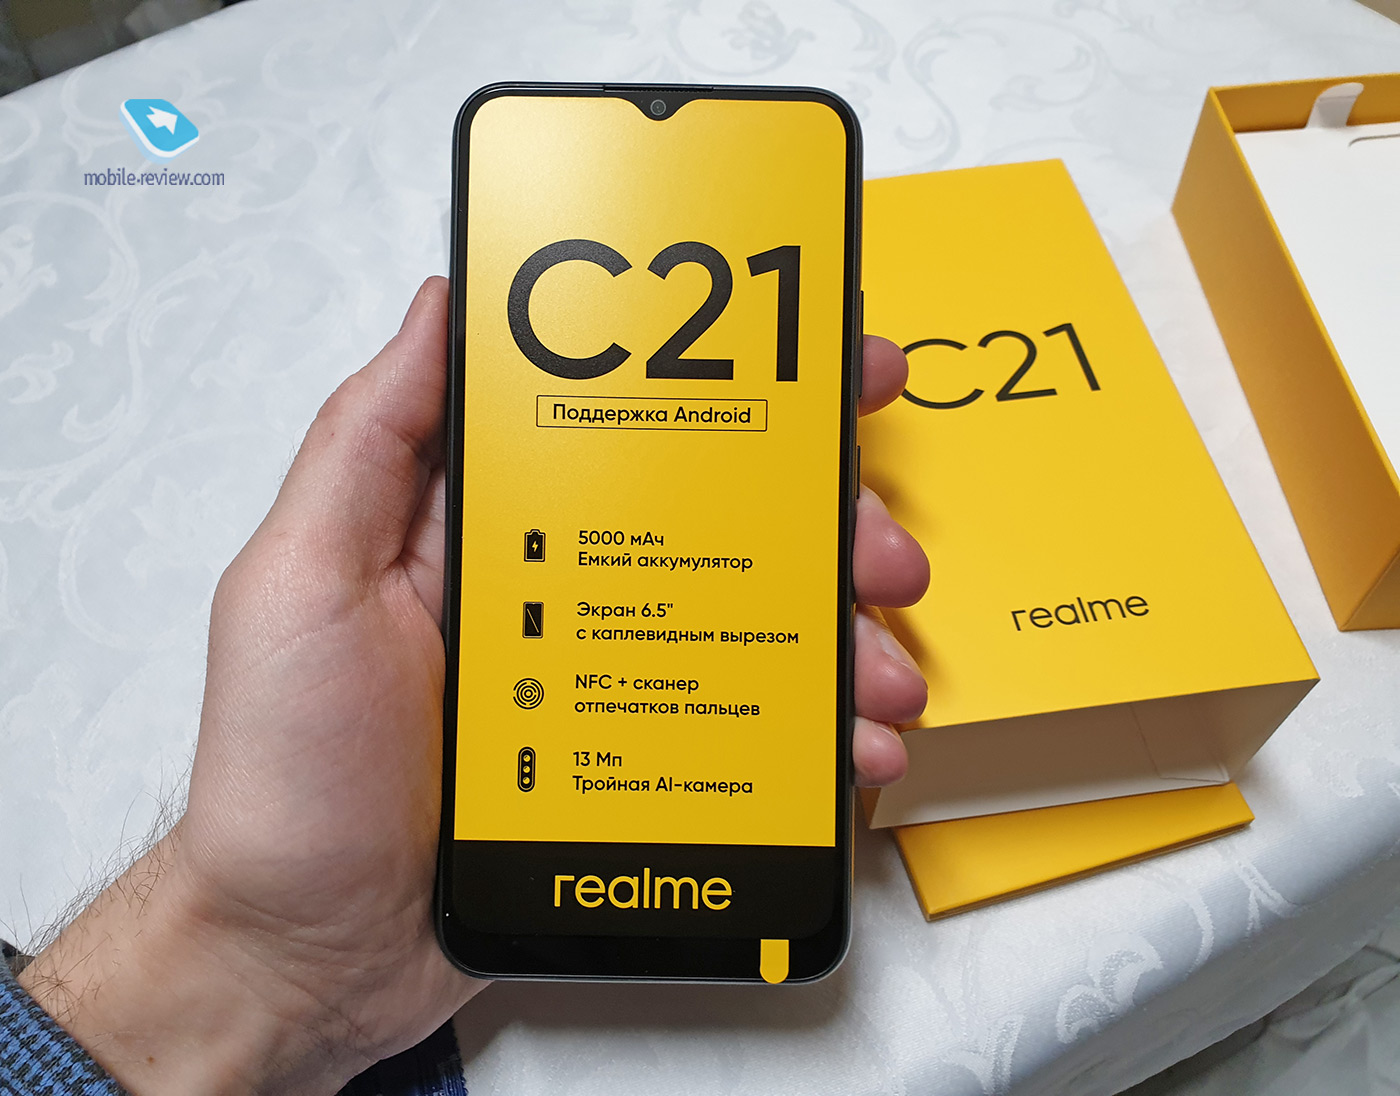 Queen's move. Realme C21 (NFC 4/64 GB) for 9 rubles changes the rules of the game